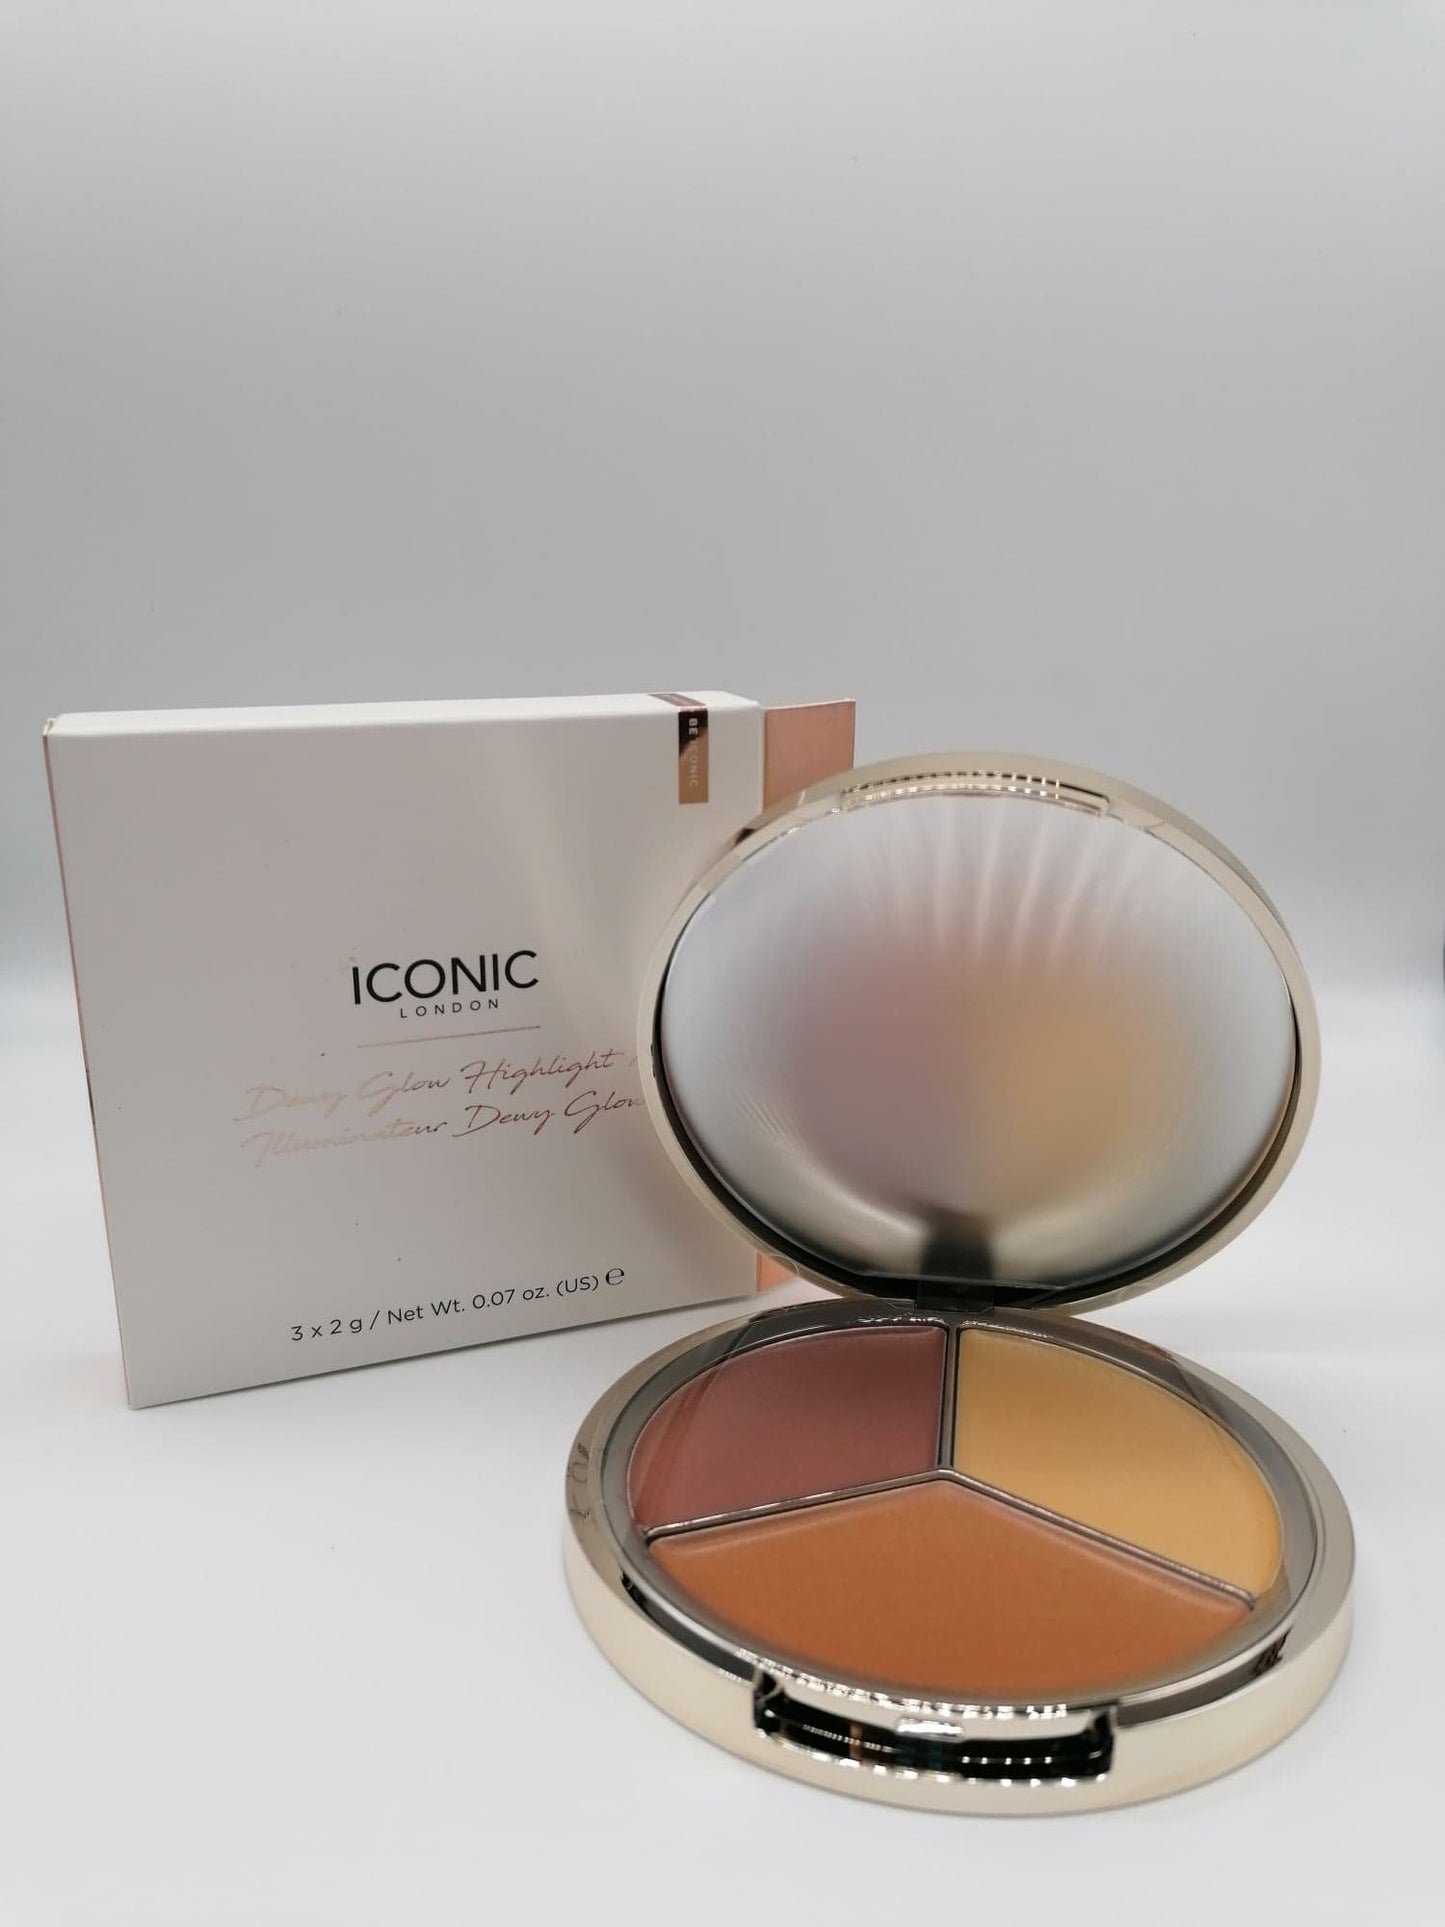 Iconic Dewy Glow Highlighter